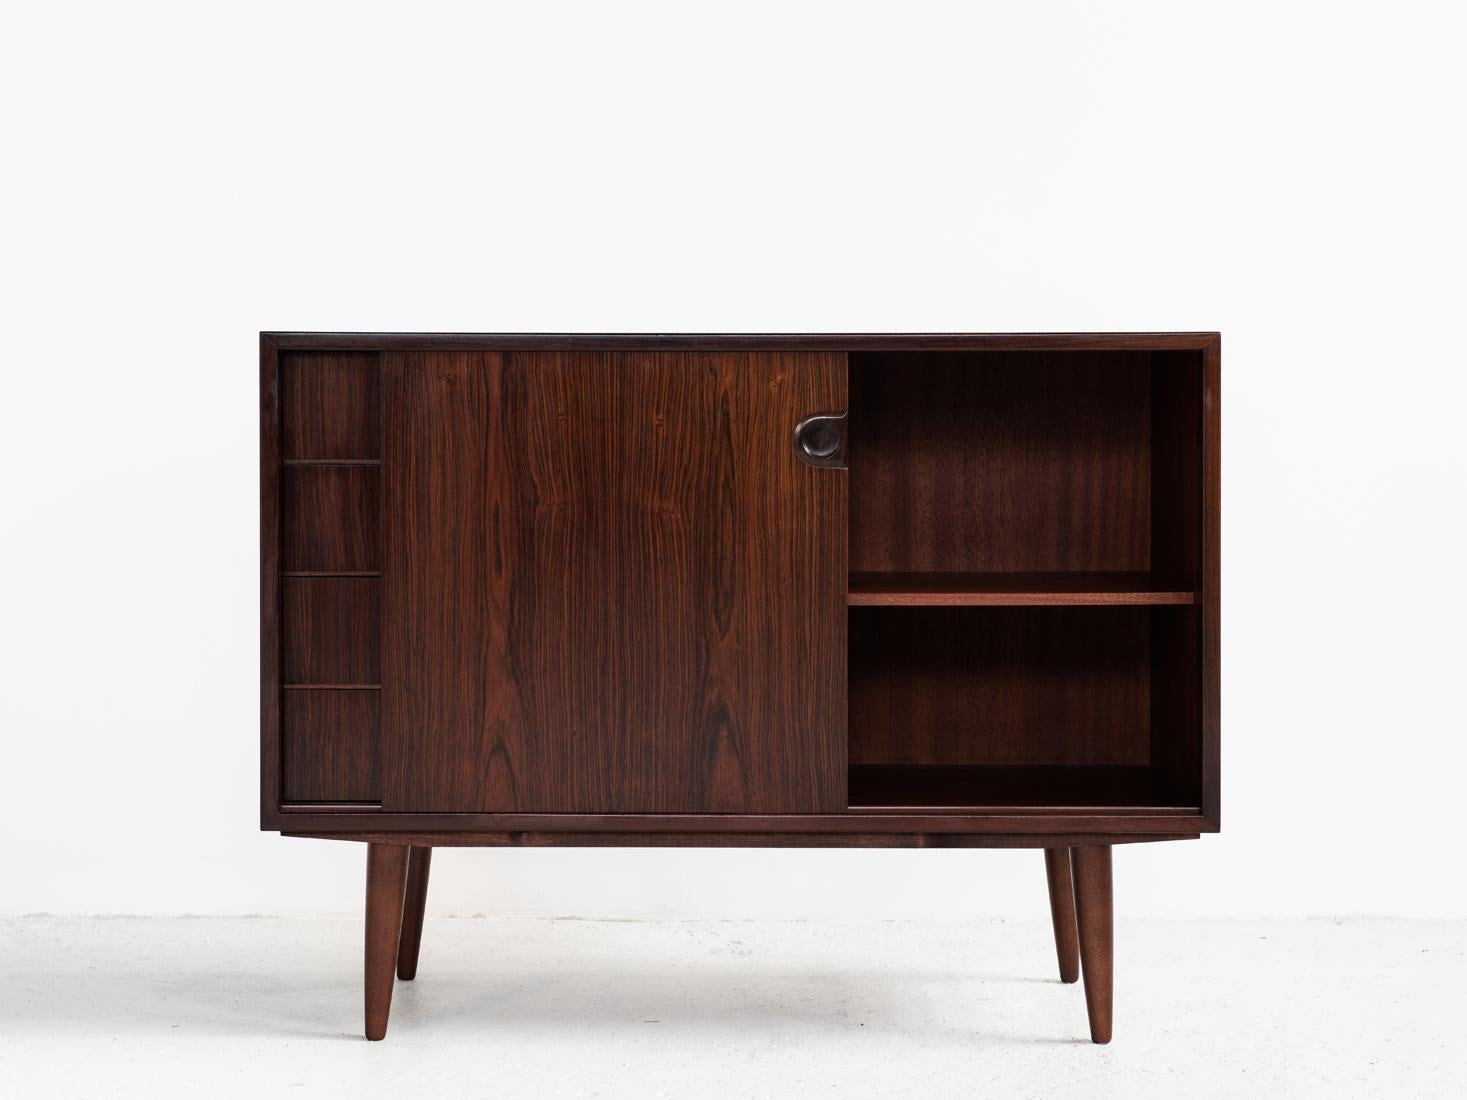 This midcentury sideboard was made in Denmark in the 1960s. We don't know the manufacturer. It shows true high quality manufacturing in rosewood with a beautiful design of the handles. This cupboard has 4 drawers and 1 sliding door. It has round